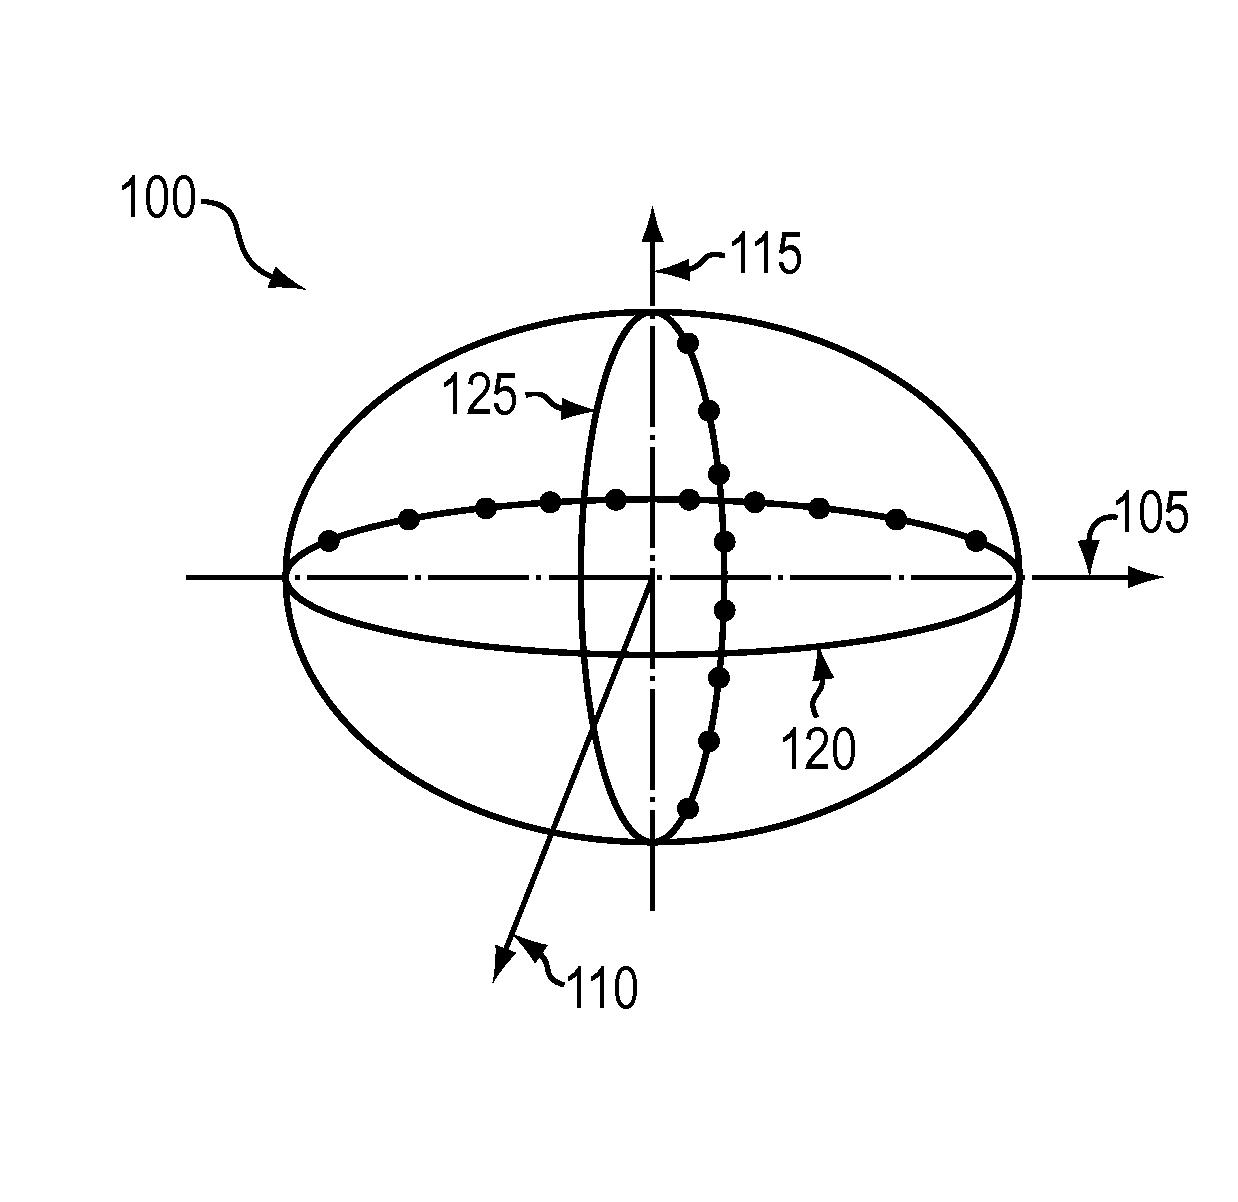 Electric motor having an approximated ellipsoid shaped rotor